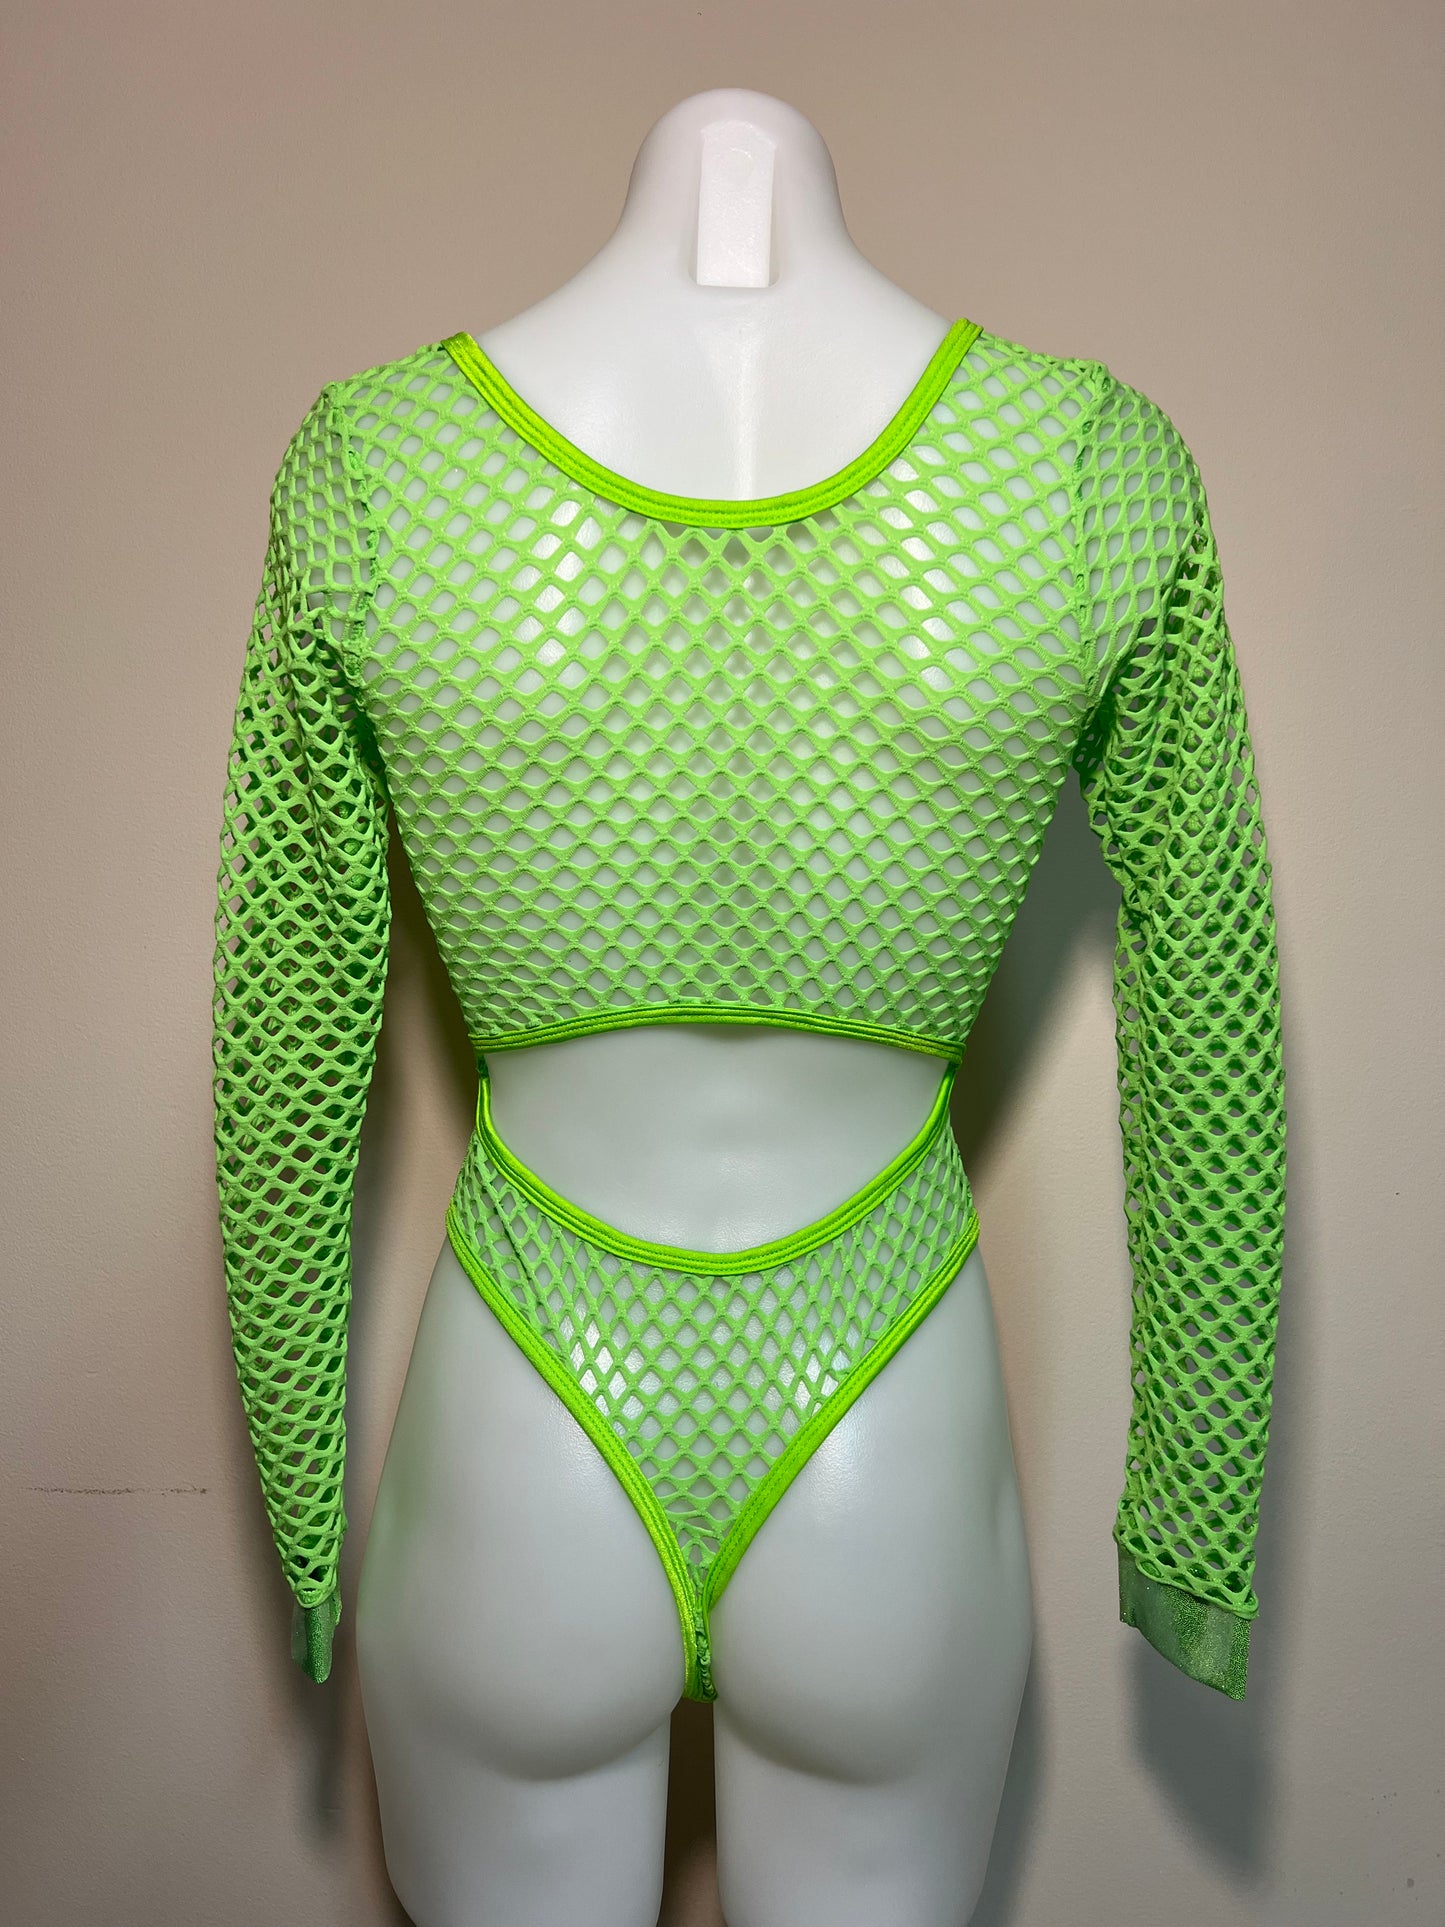 Neon Green Fishnet Exotic Dance Wear One-Piece Leotard Outfit